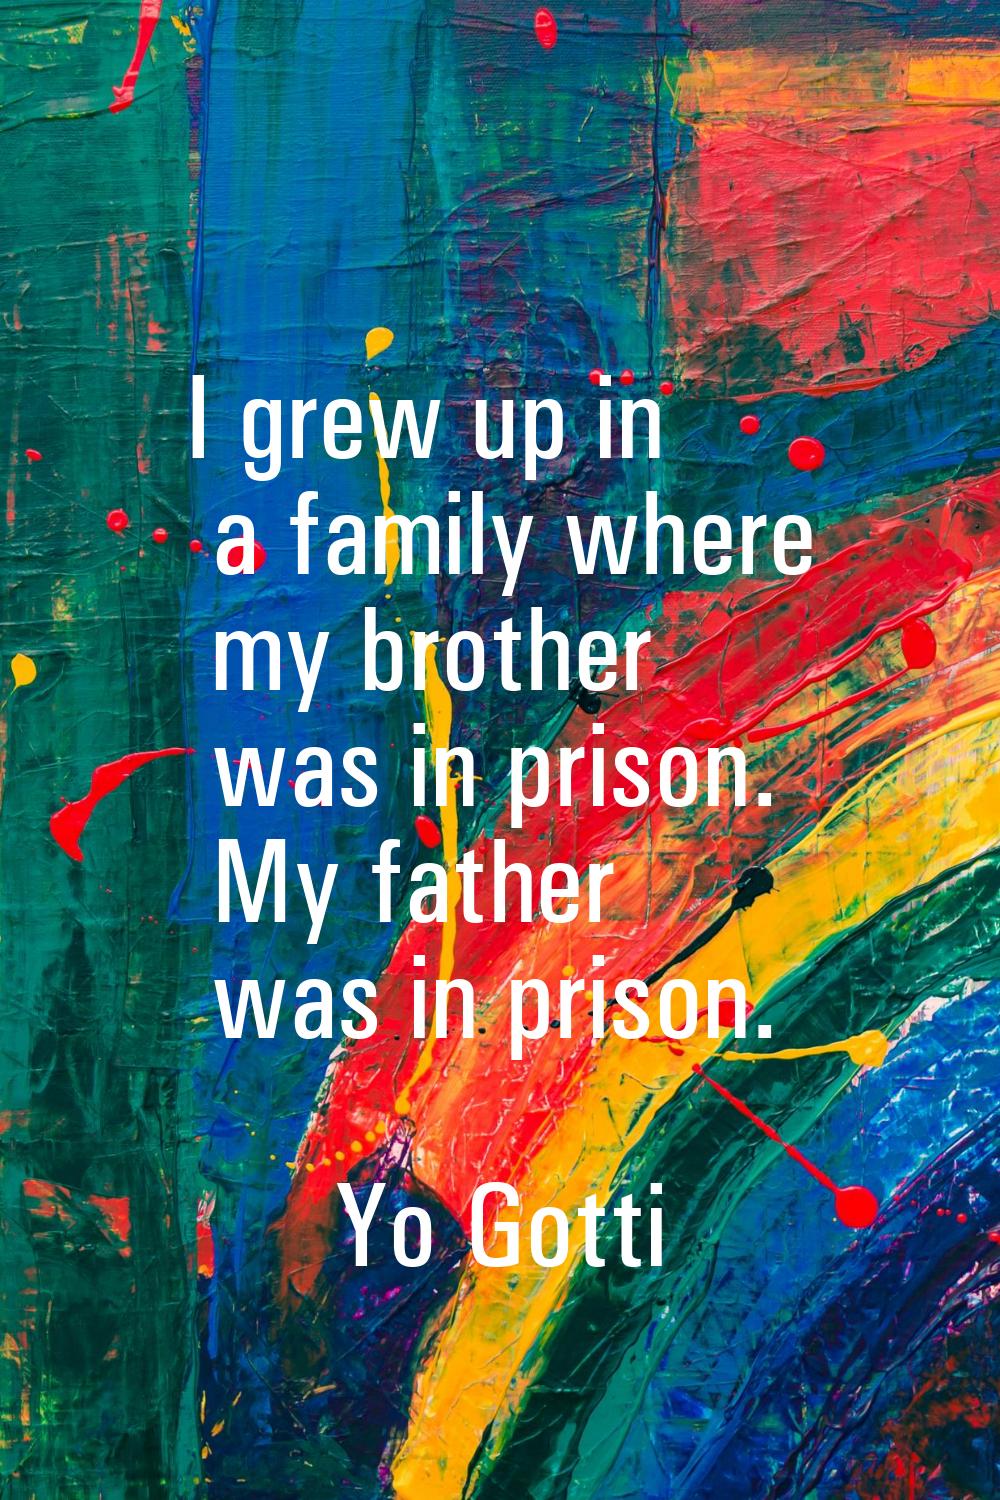 I grew up in a family where my brother was in prison. My father was in prison.